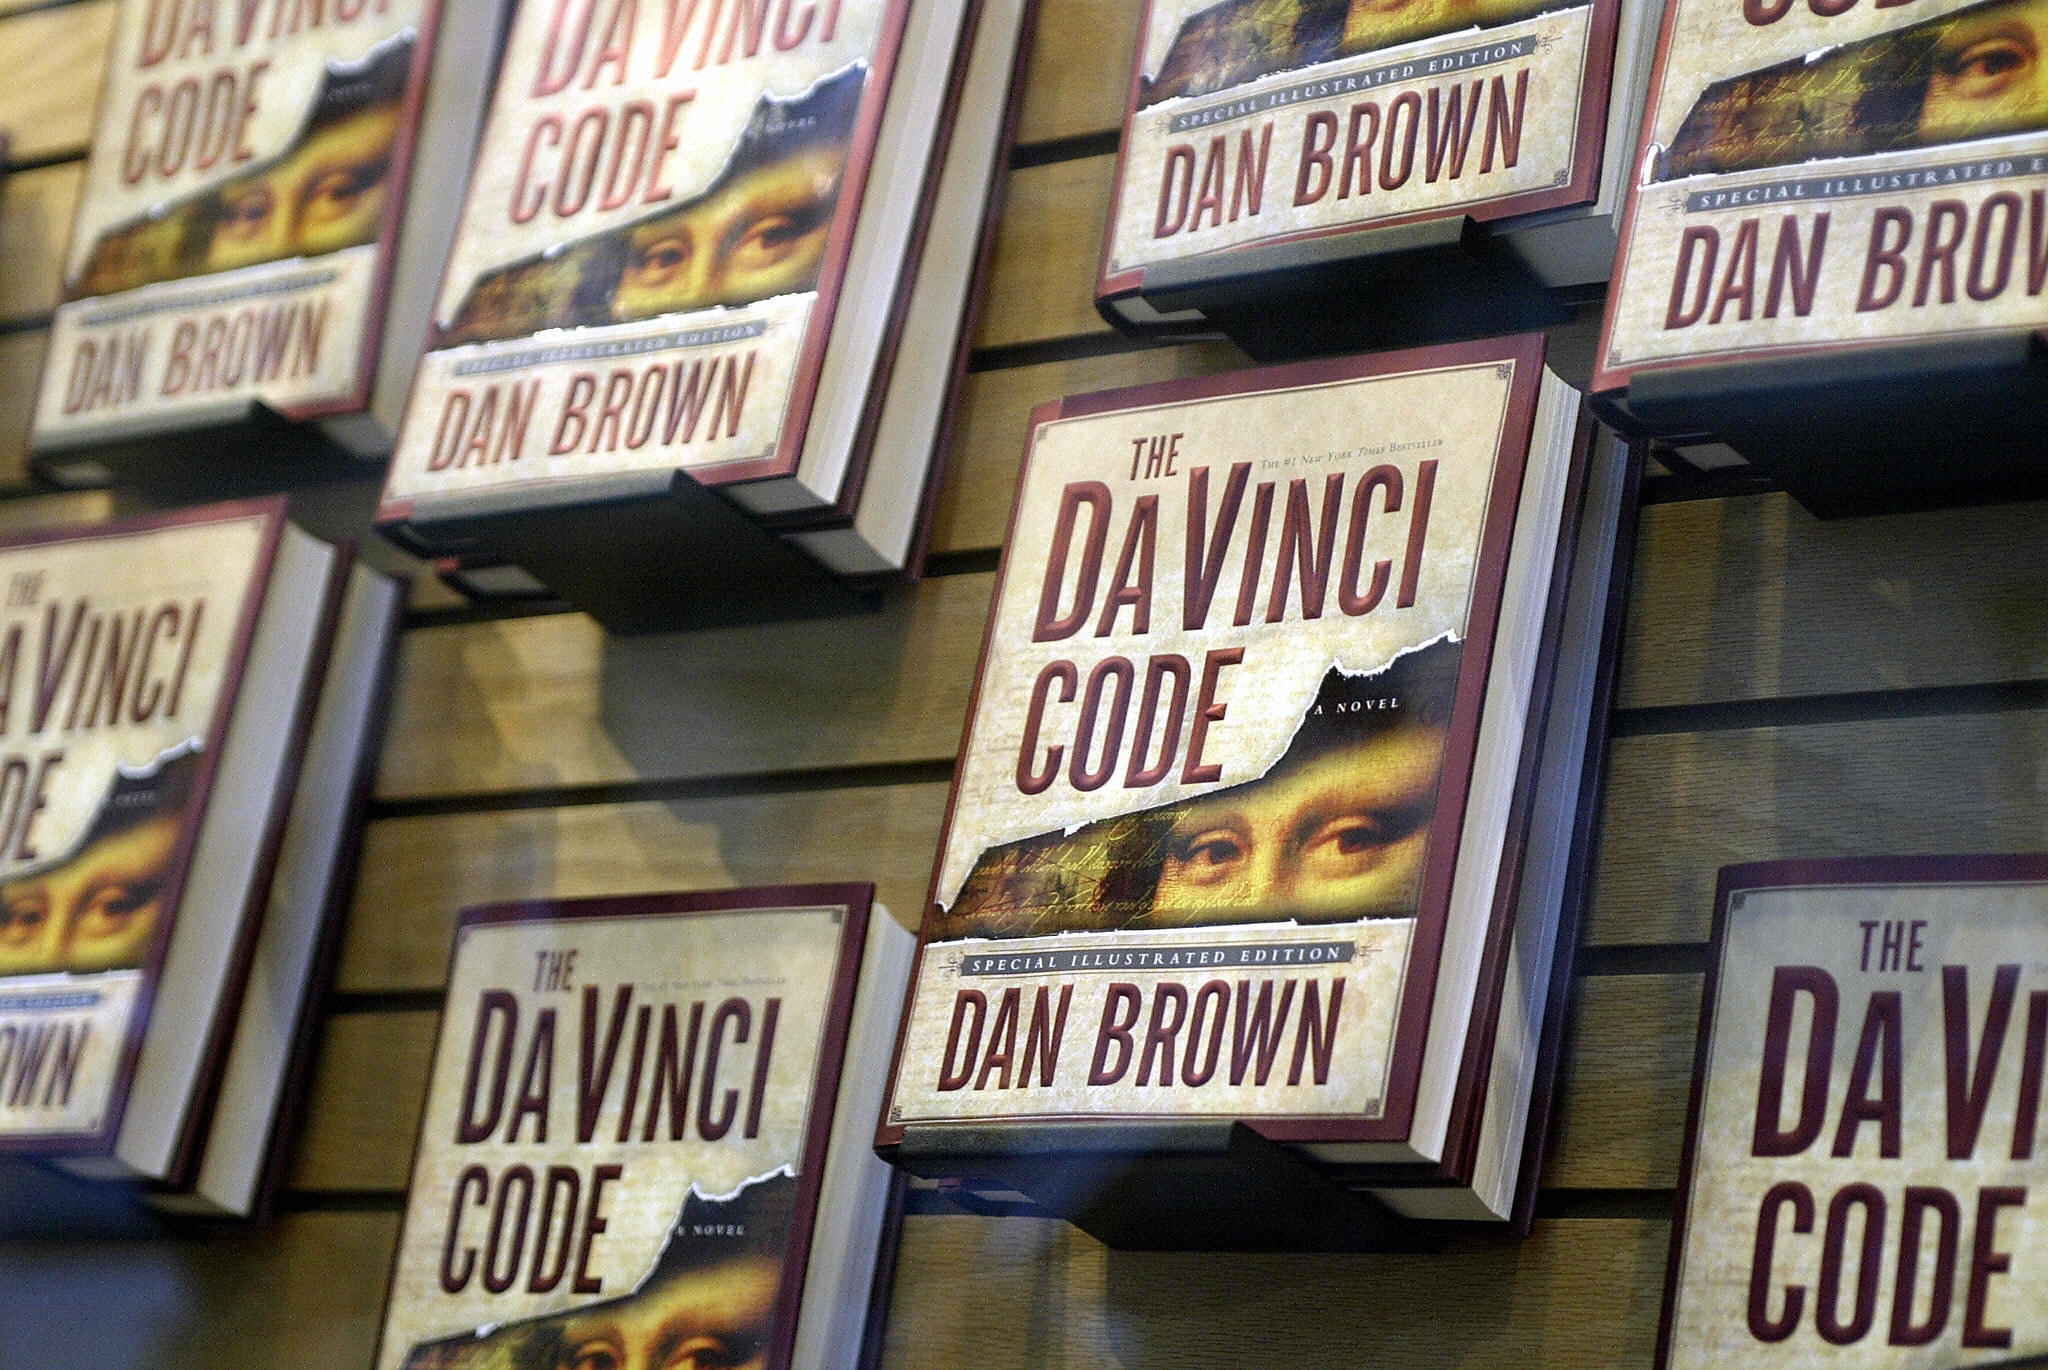 A bookstore window front displaying The Da Vinci Code.